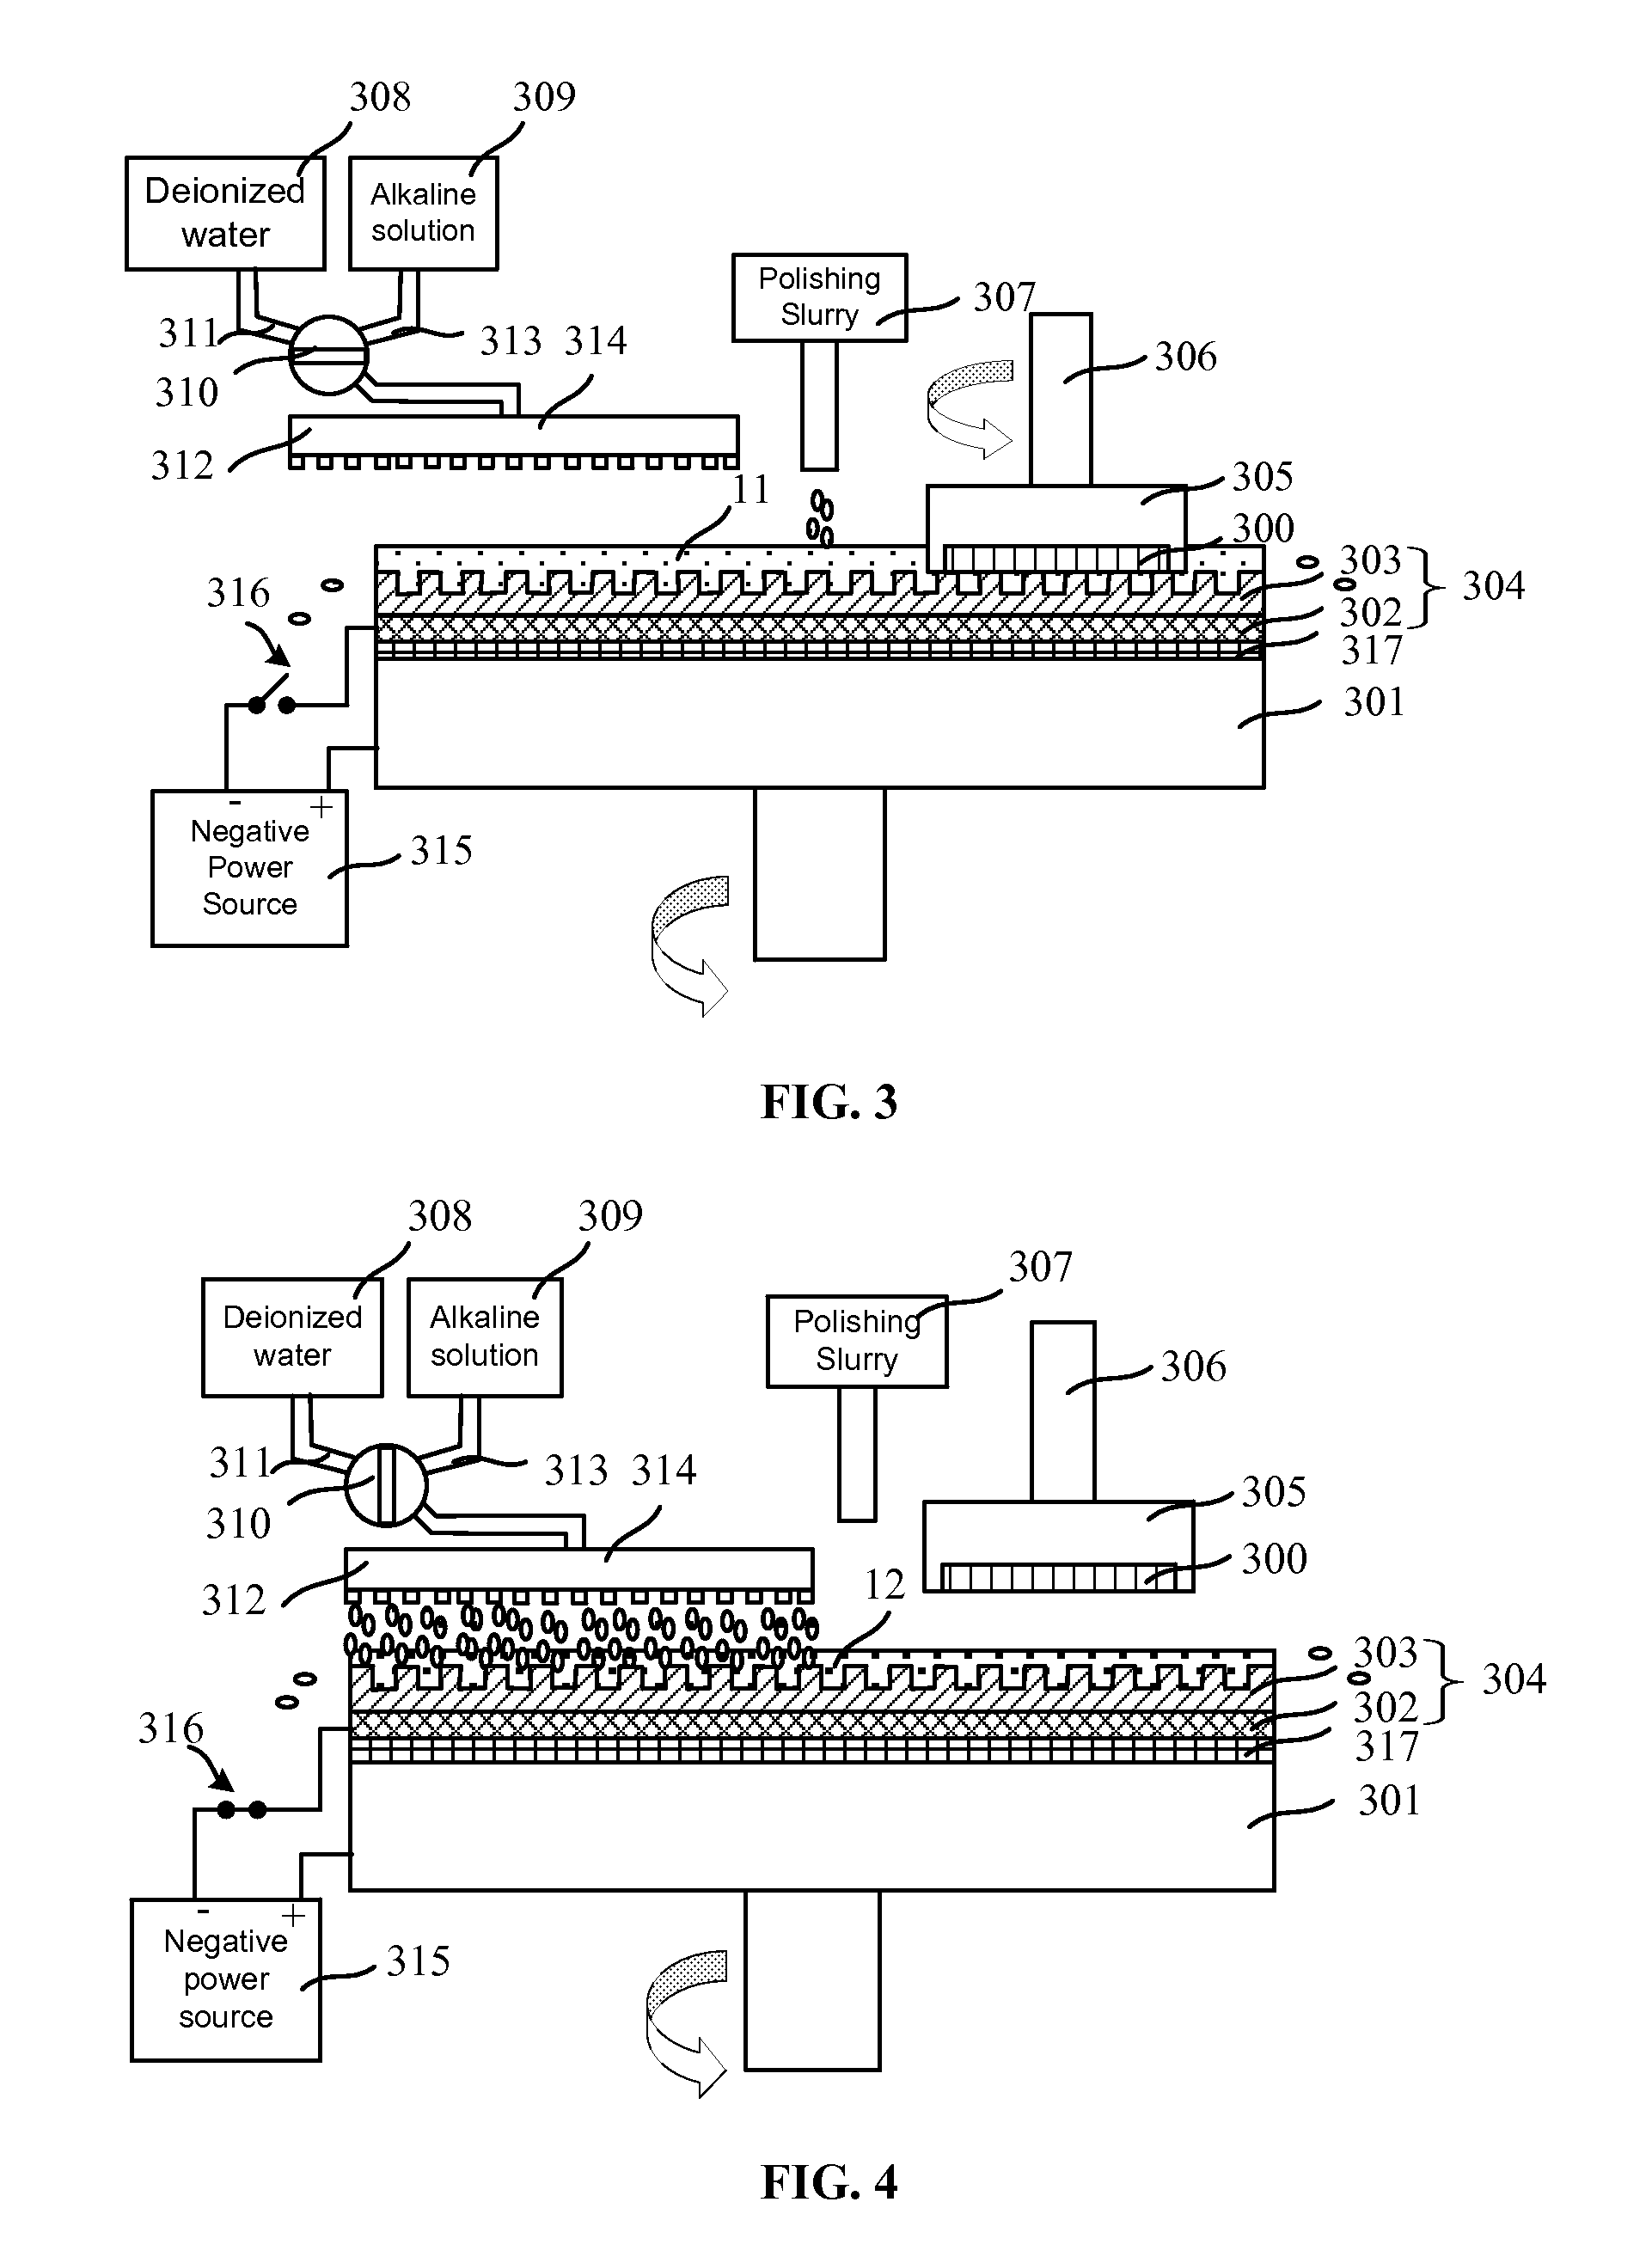 Chemical mechanical planarization apparatus and methods